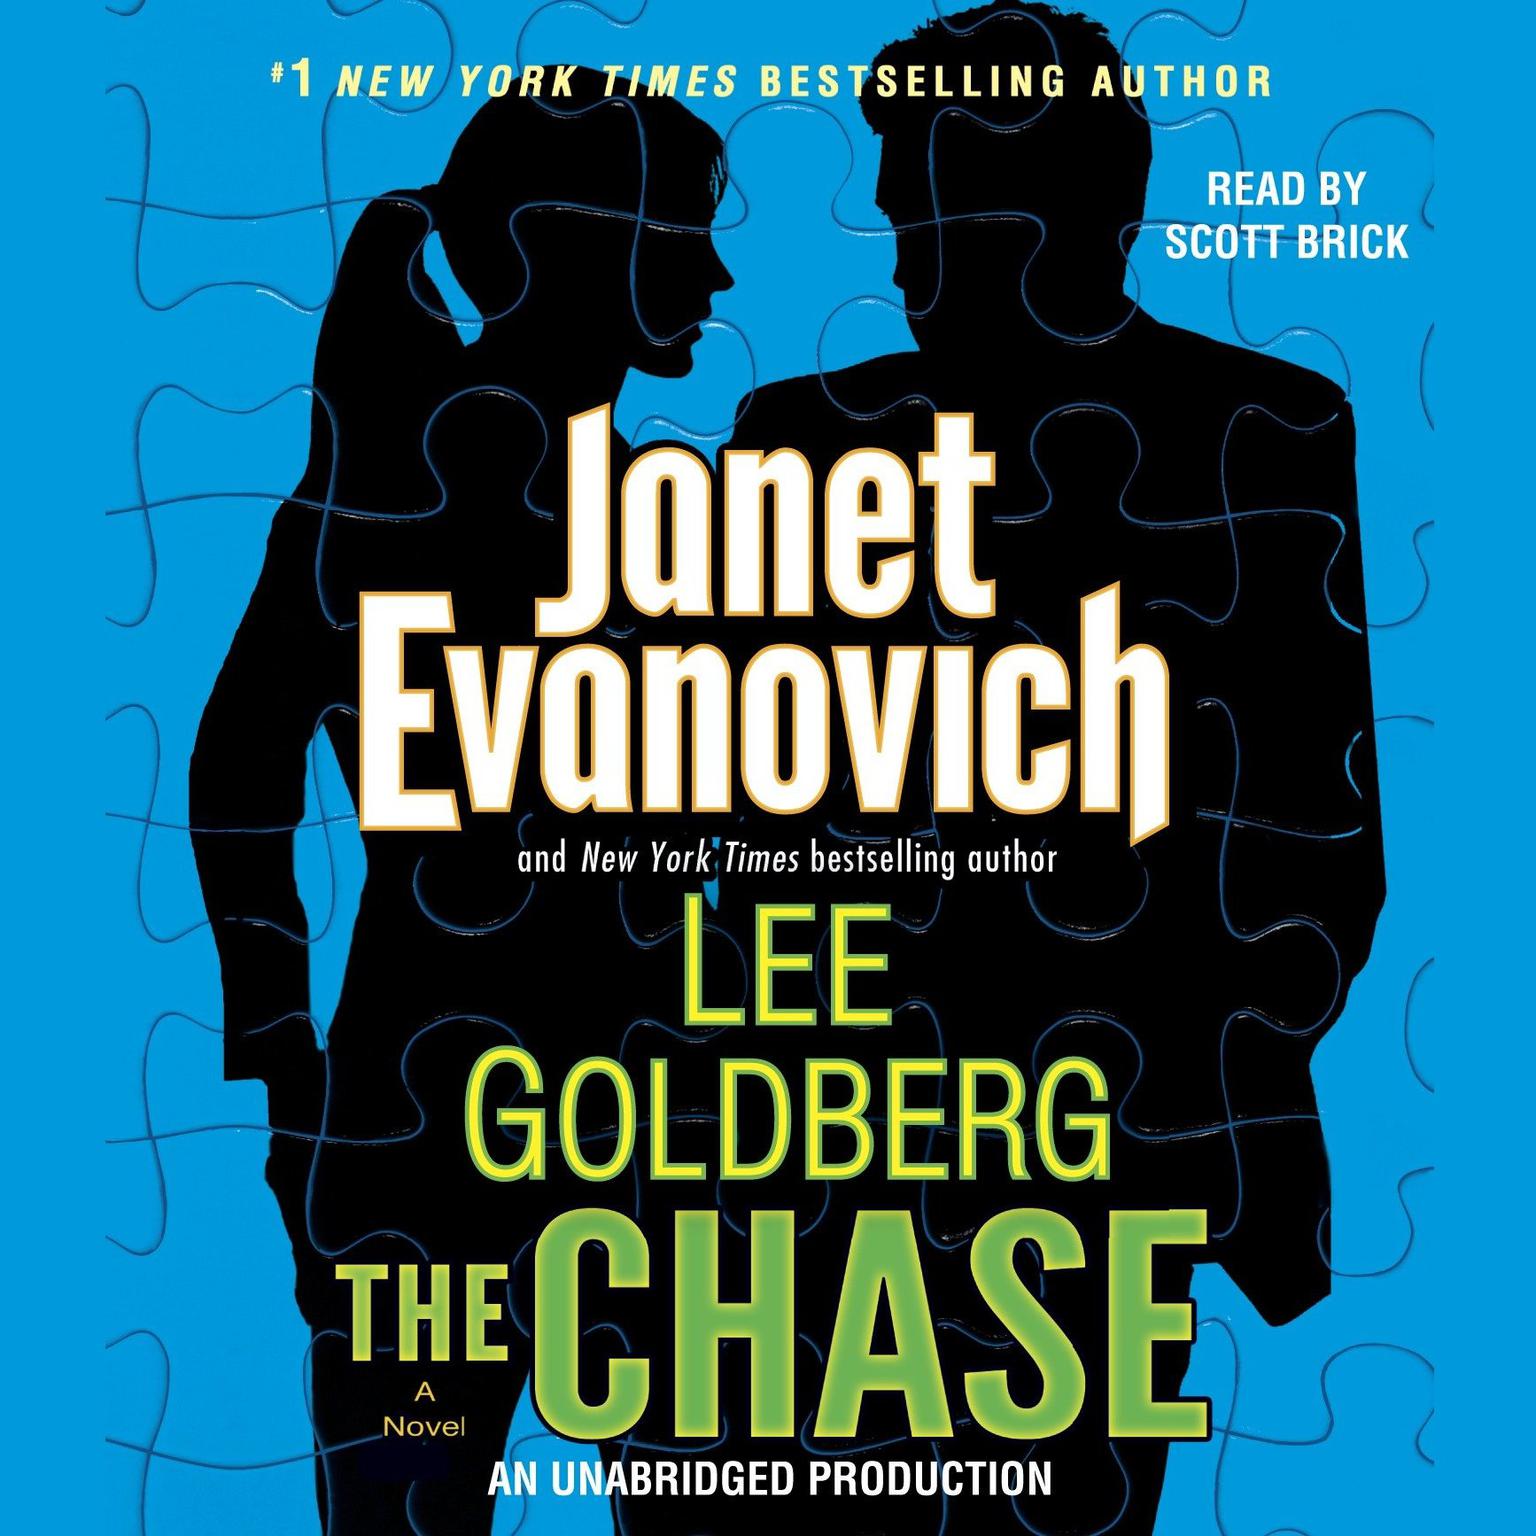 The Chase: A Novel Audiobook, by Janet Evanovich